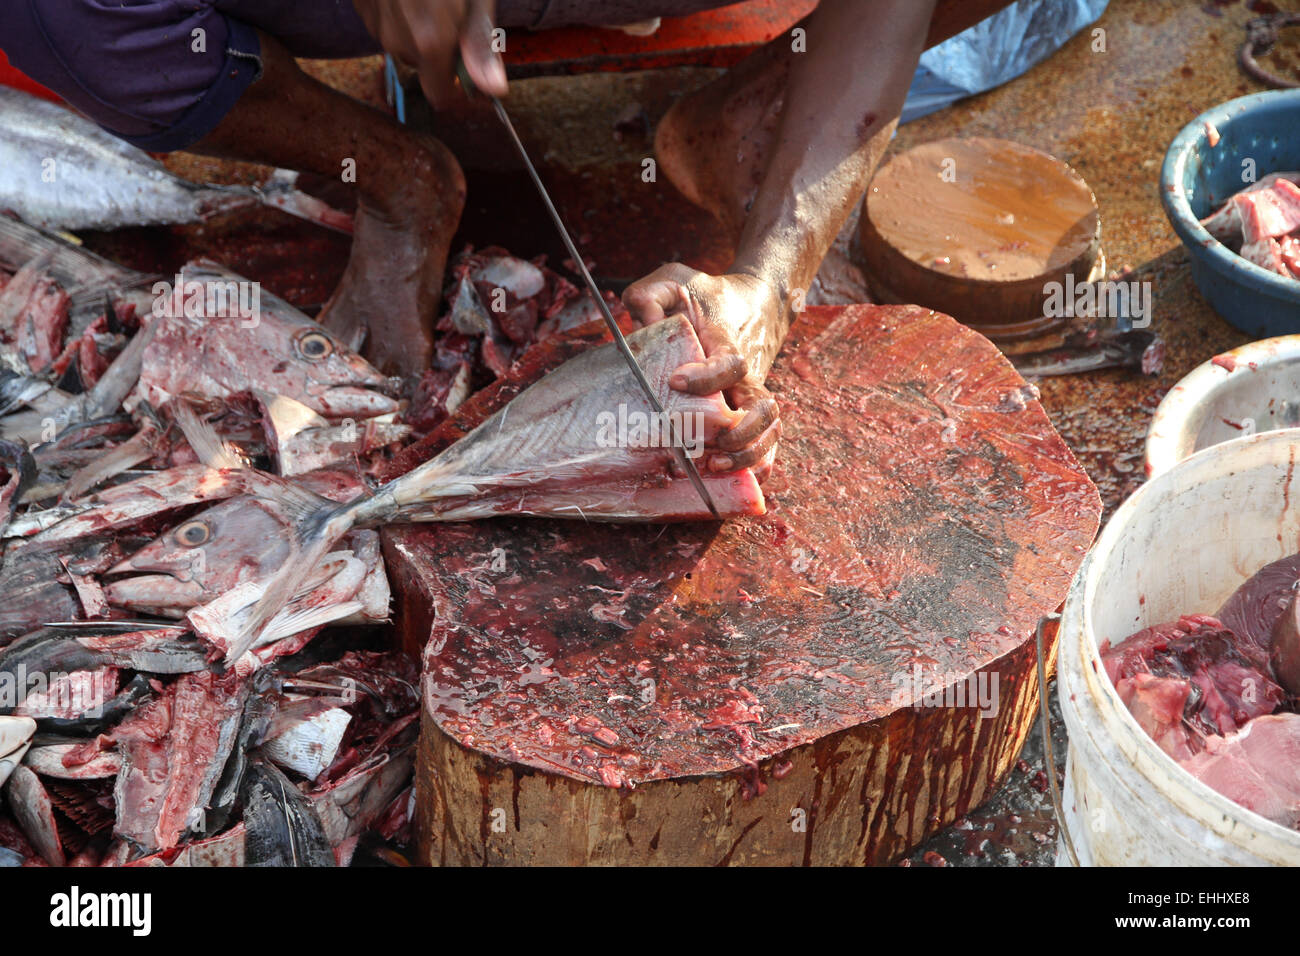 A man is cutting and preparing the fish at the fish market Stock Photo